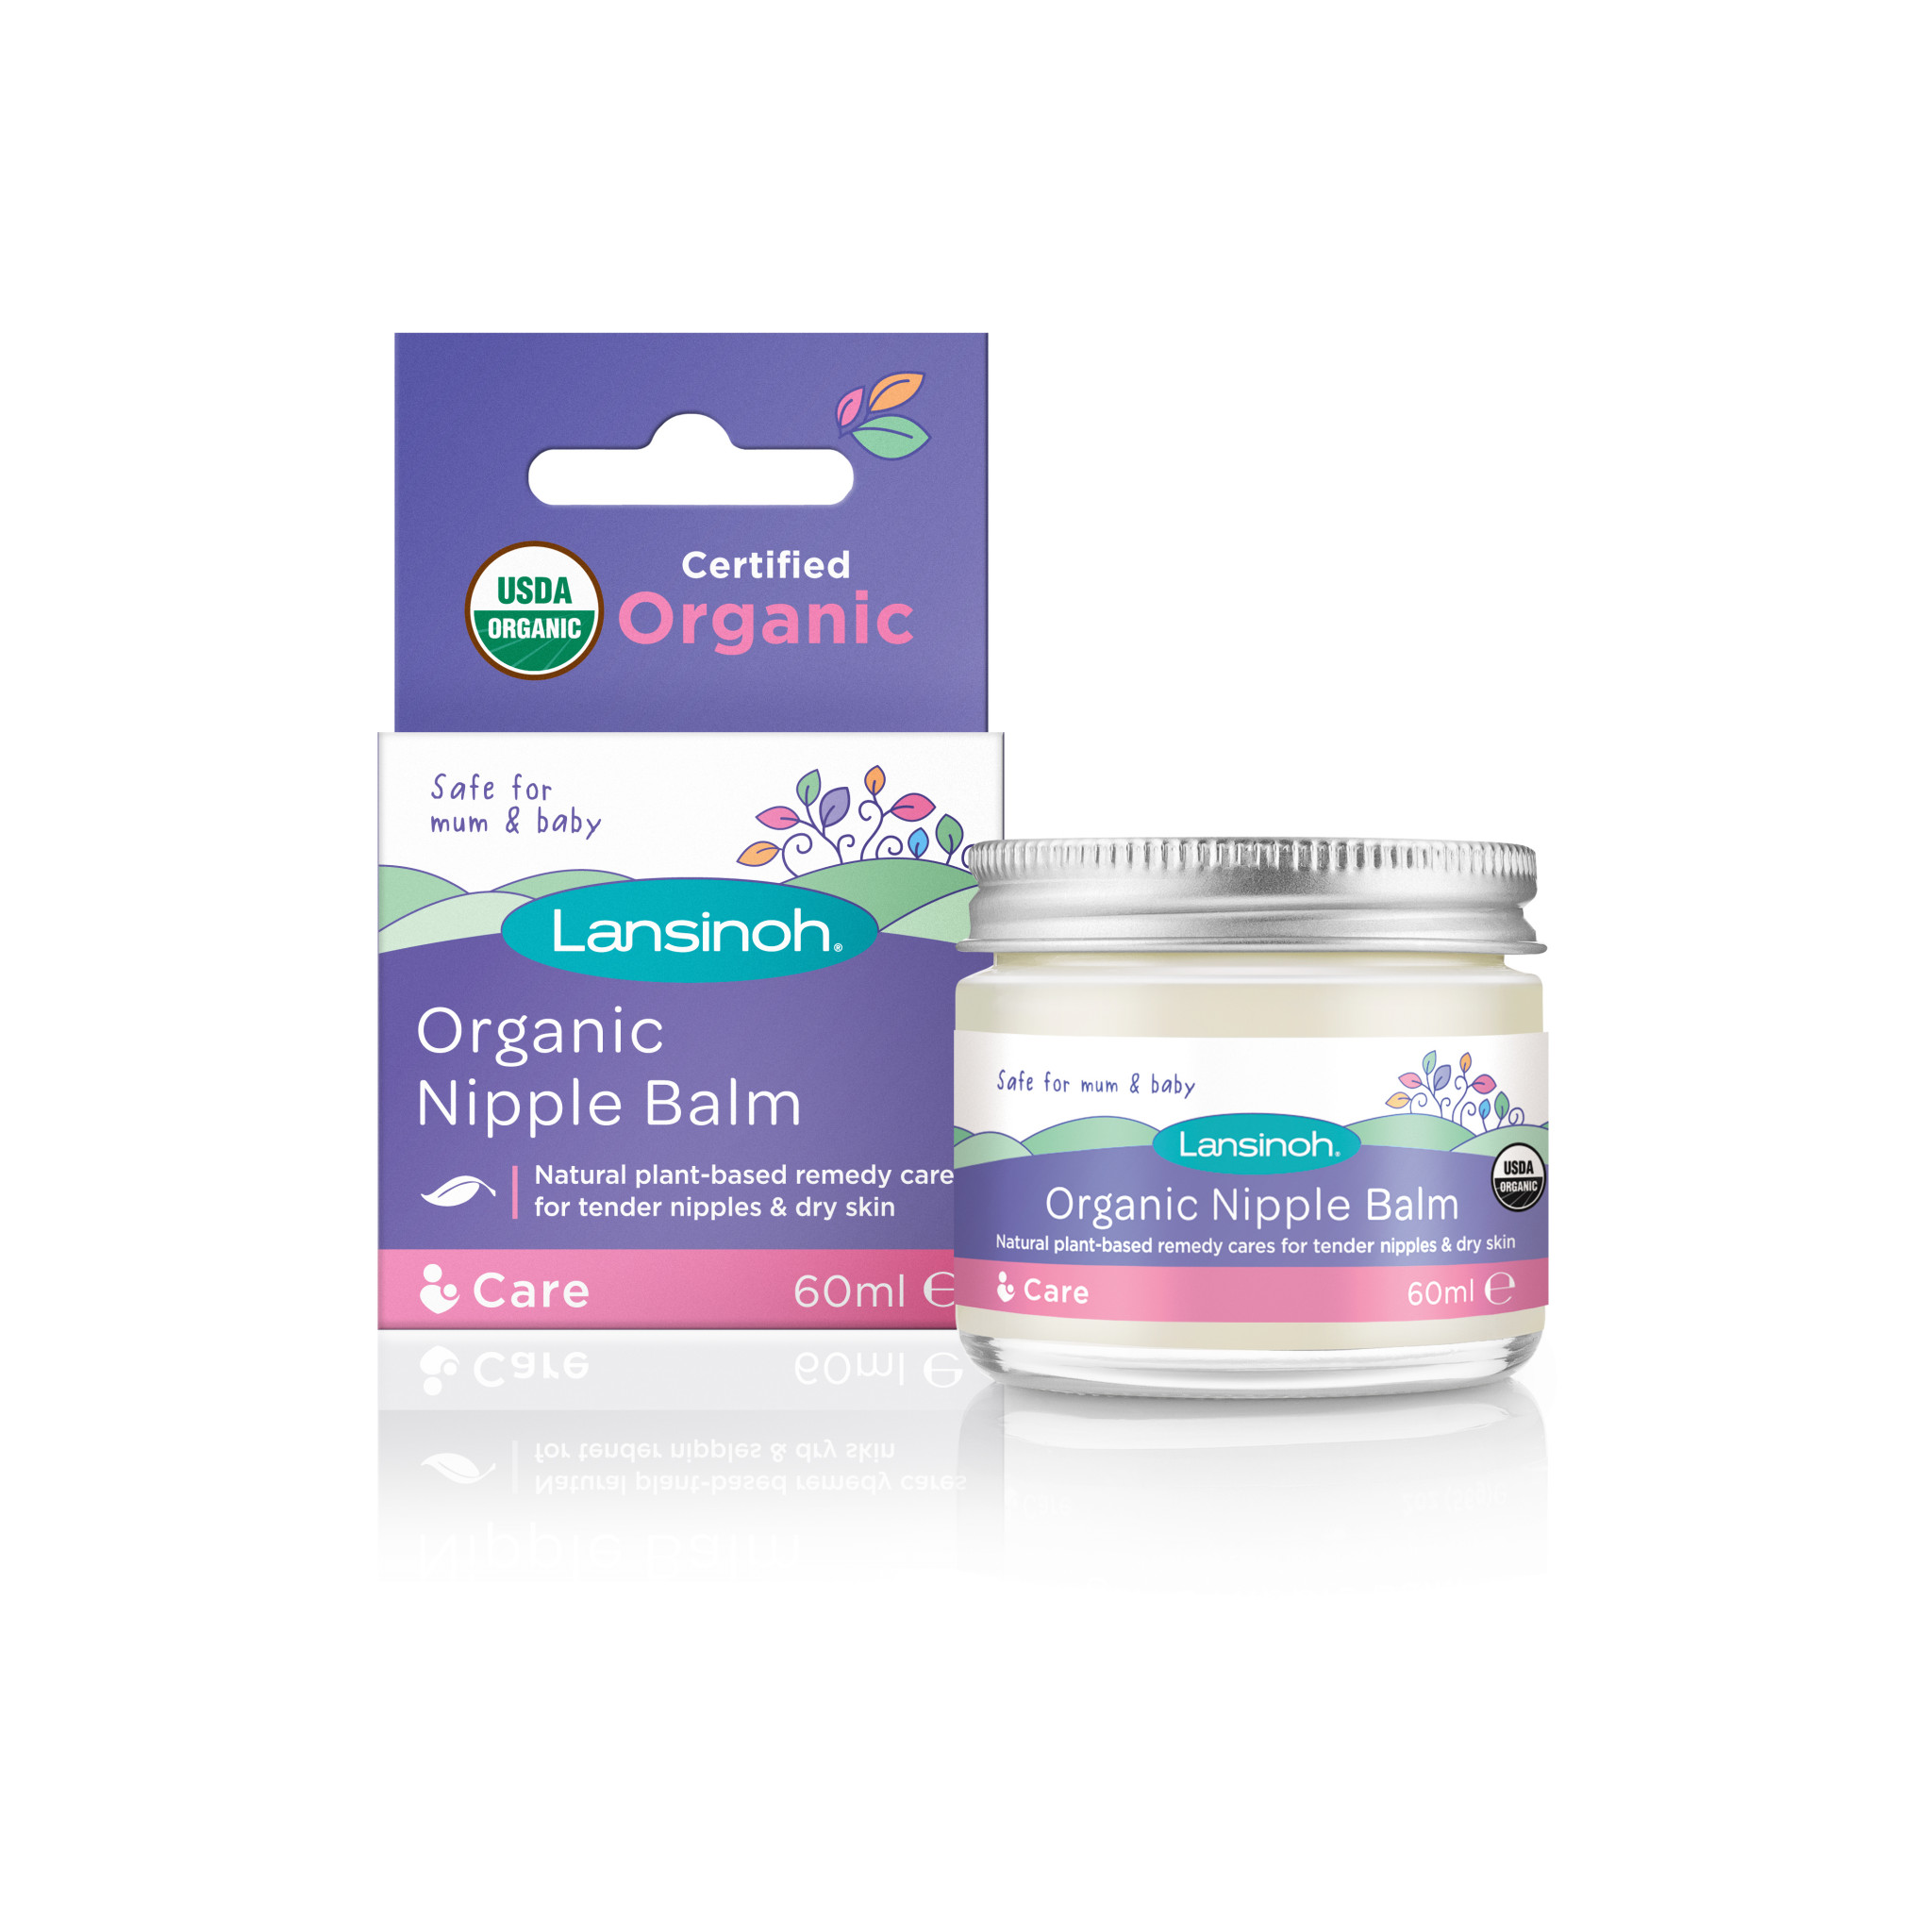 Lansinoh launches new nipple balm that is certified USDA organic